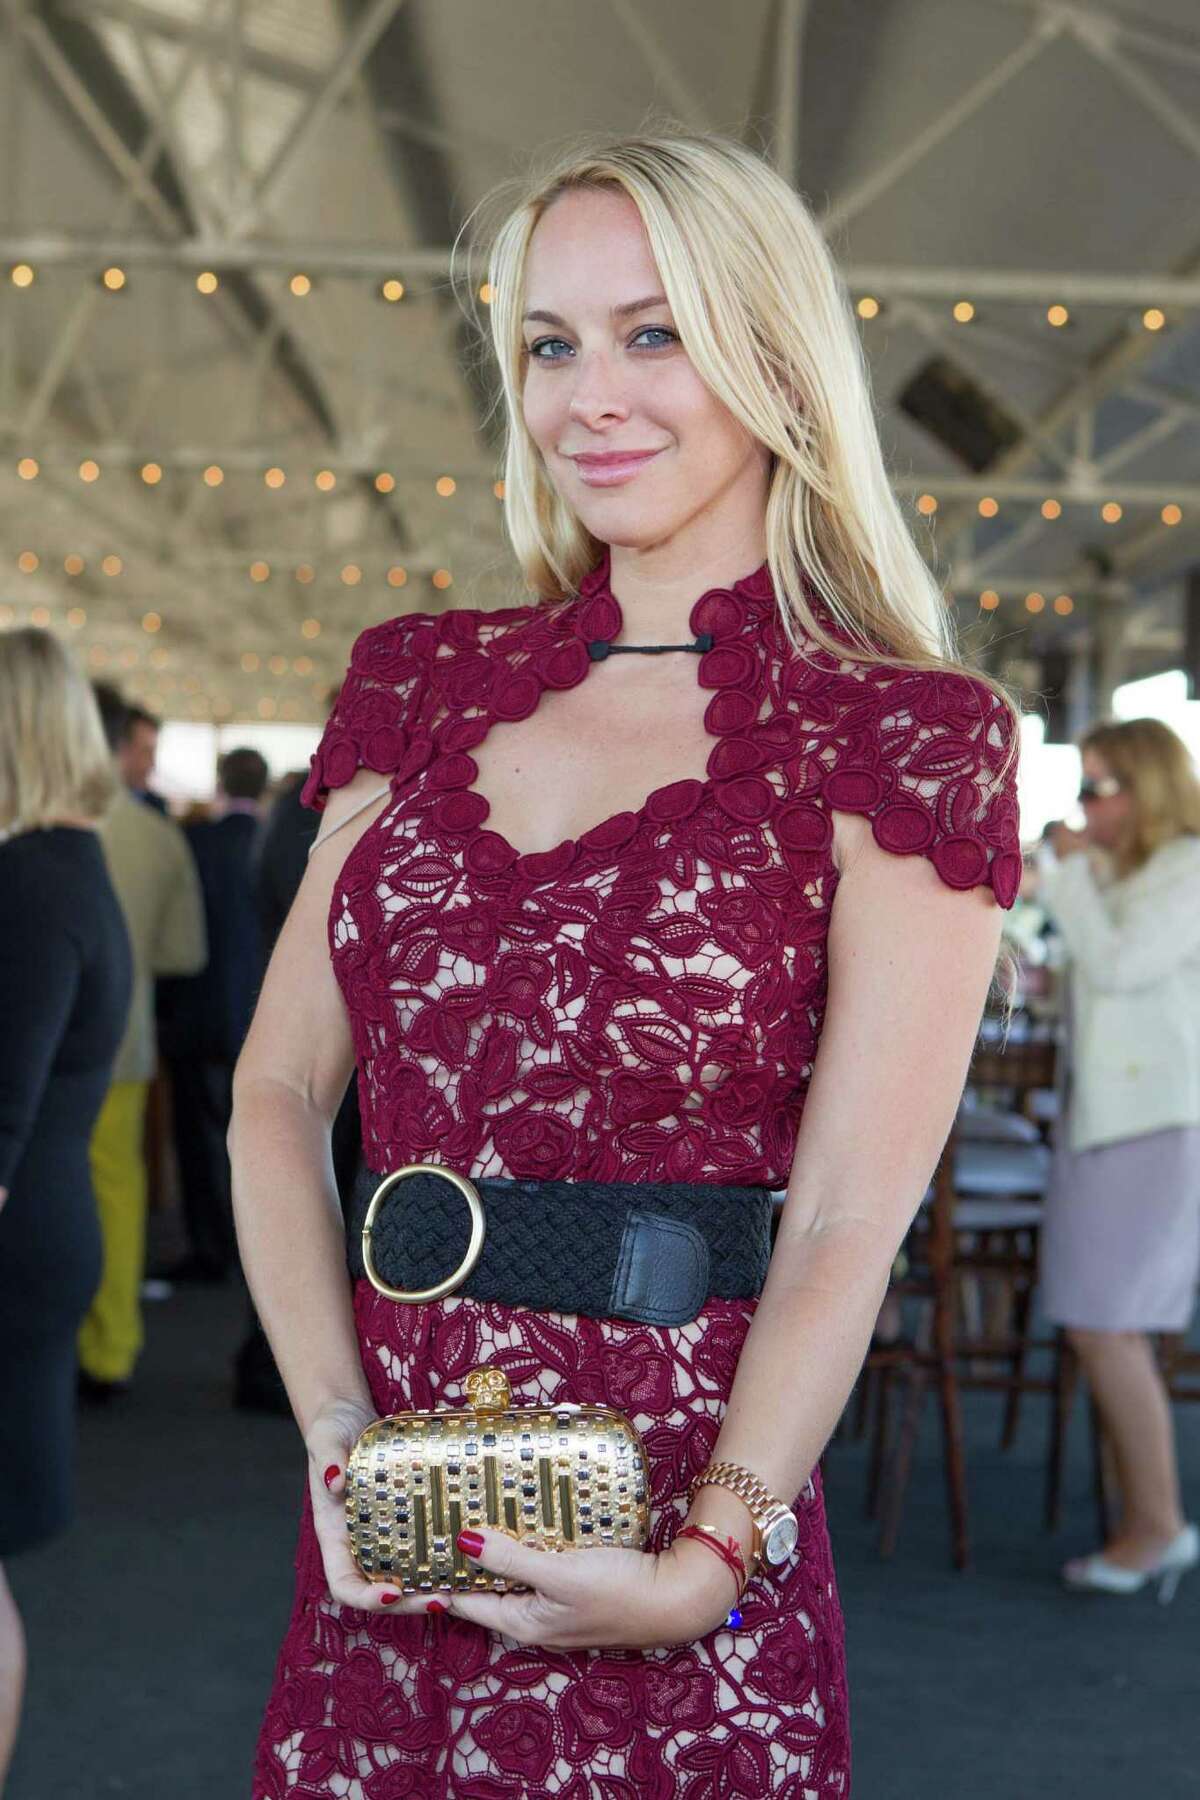 Christina Getty at the Giant Steps Charity Classic on August 2, 2014.